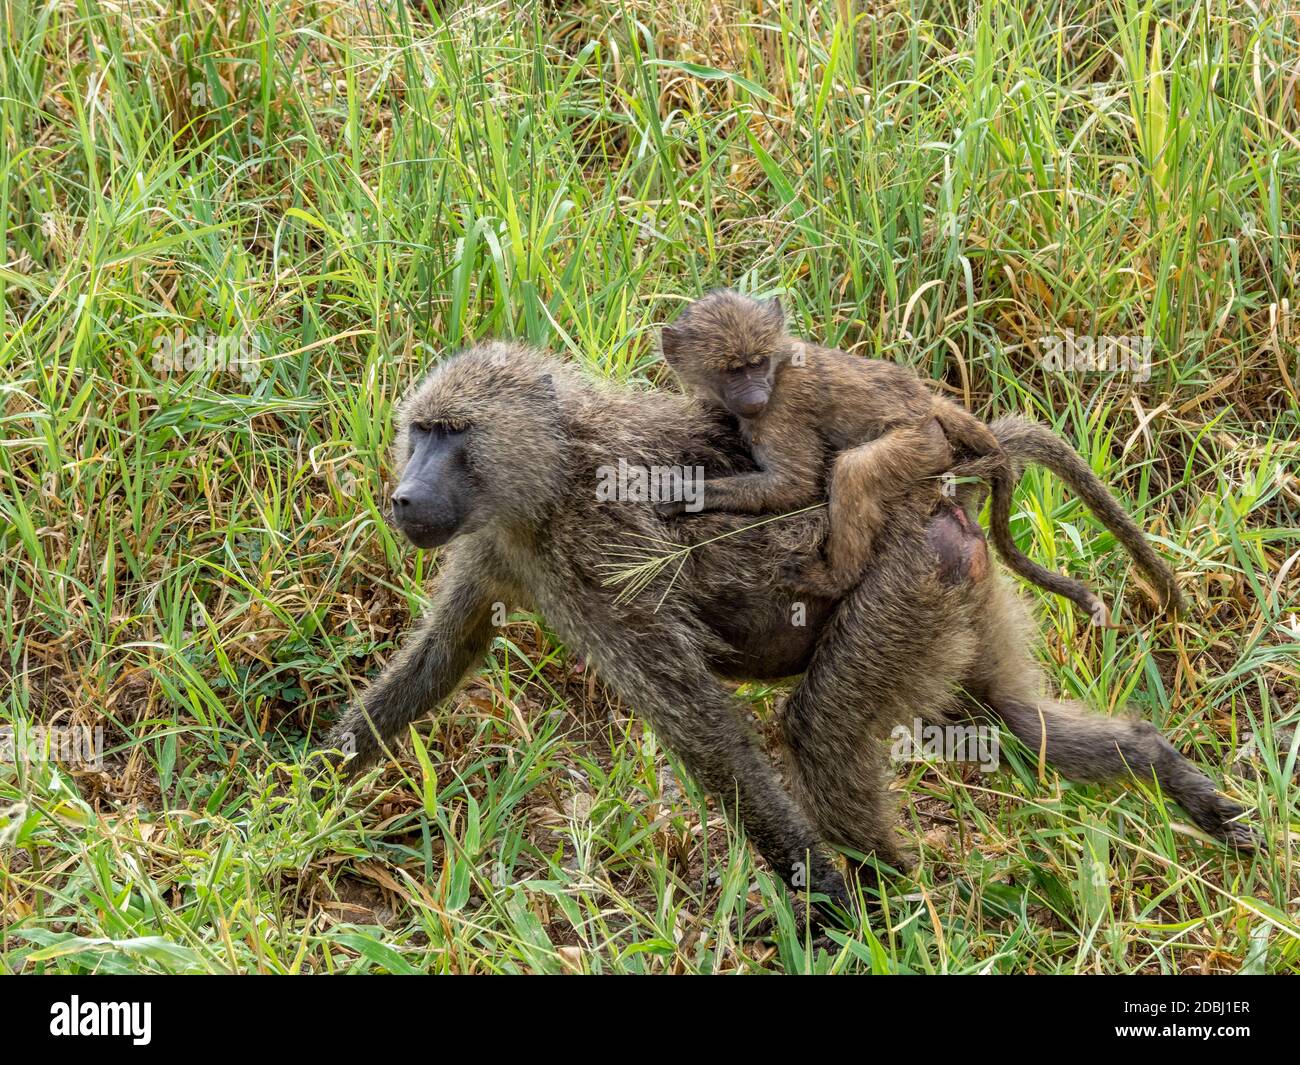 Adult olive baboon (Papio anubis) carrying juvenile on its back in Tarangire National Park, Tanzania, East Africa, Africa Stock Photo